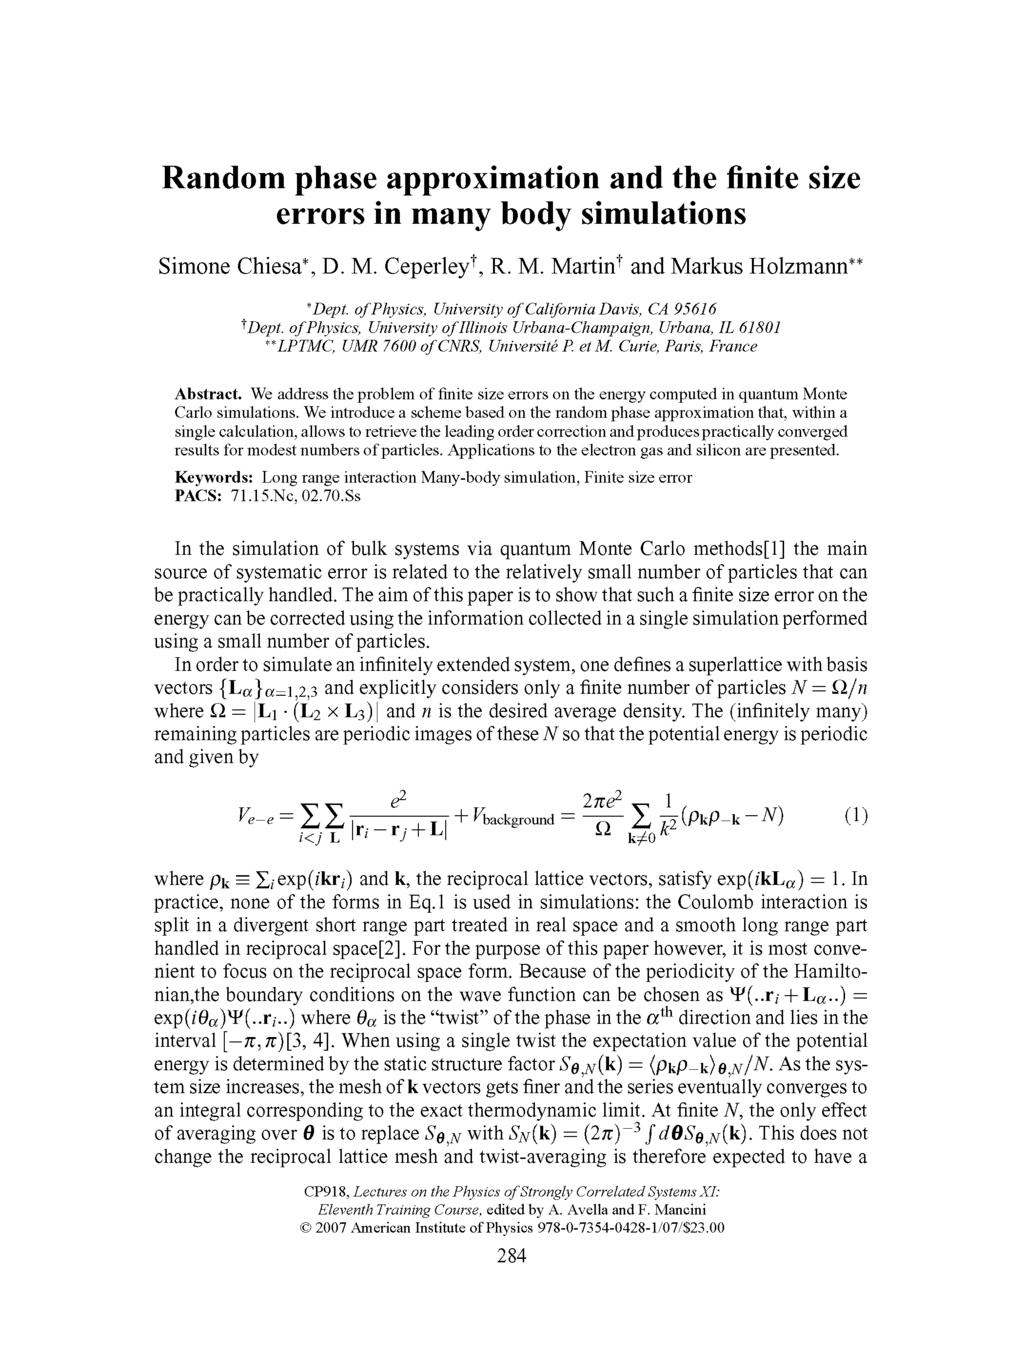 Random phase approximation and the finite size errors in many body simulations Simone Chiesa*, D. M. Ceperley 1 ', R. M. Martin 1 ' and Markus Holzmann** *Dept.